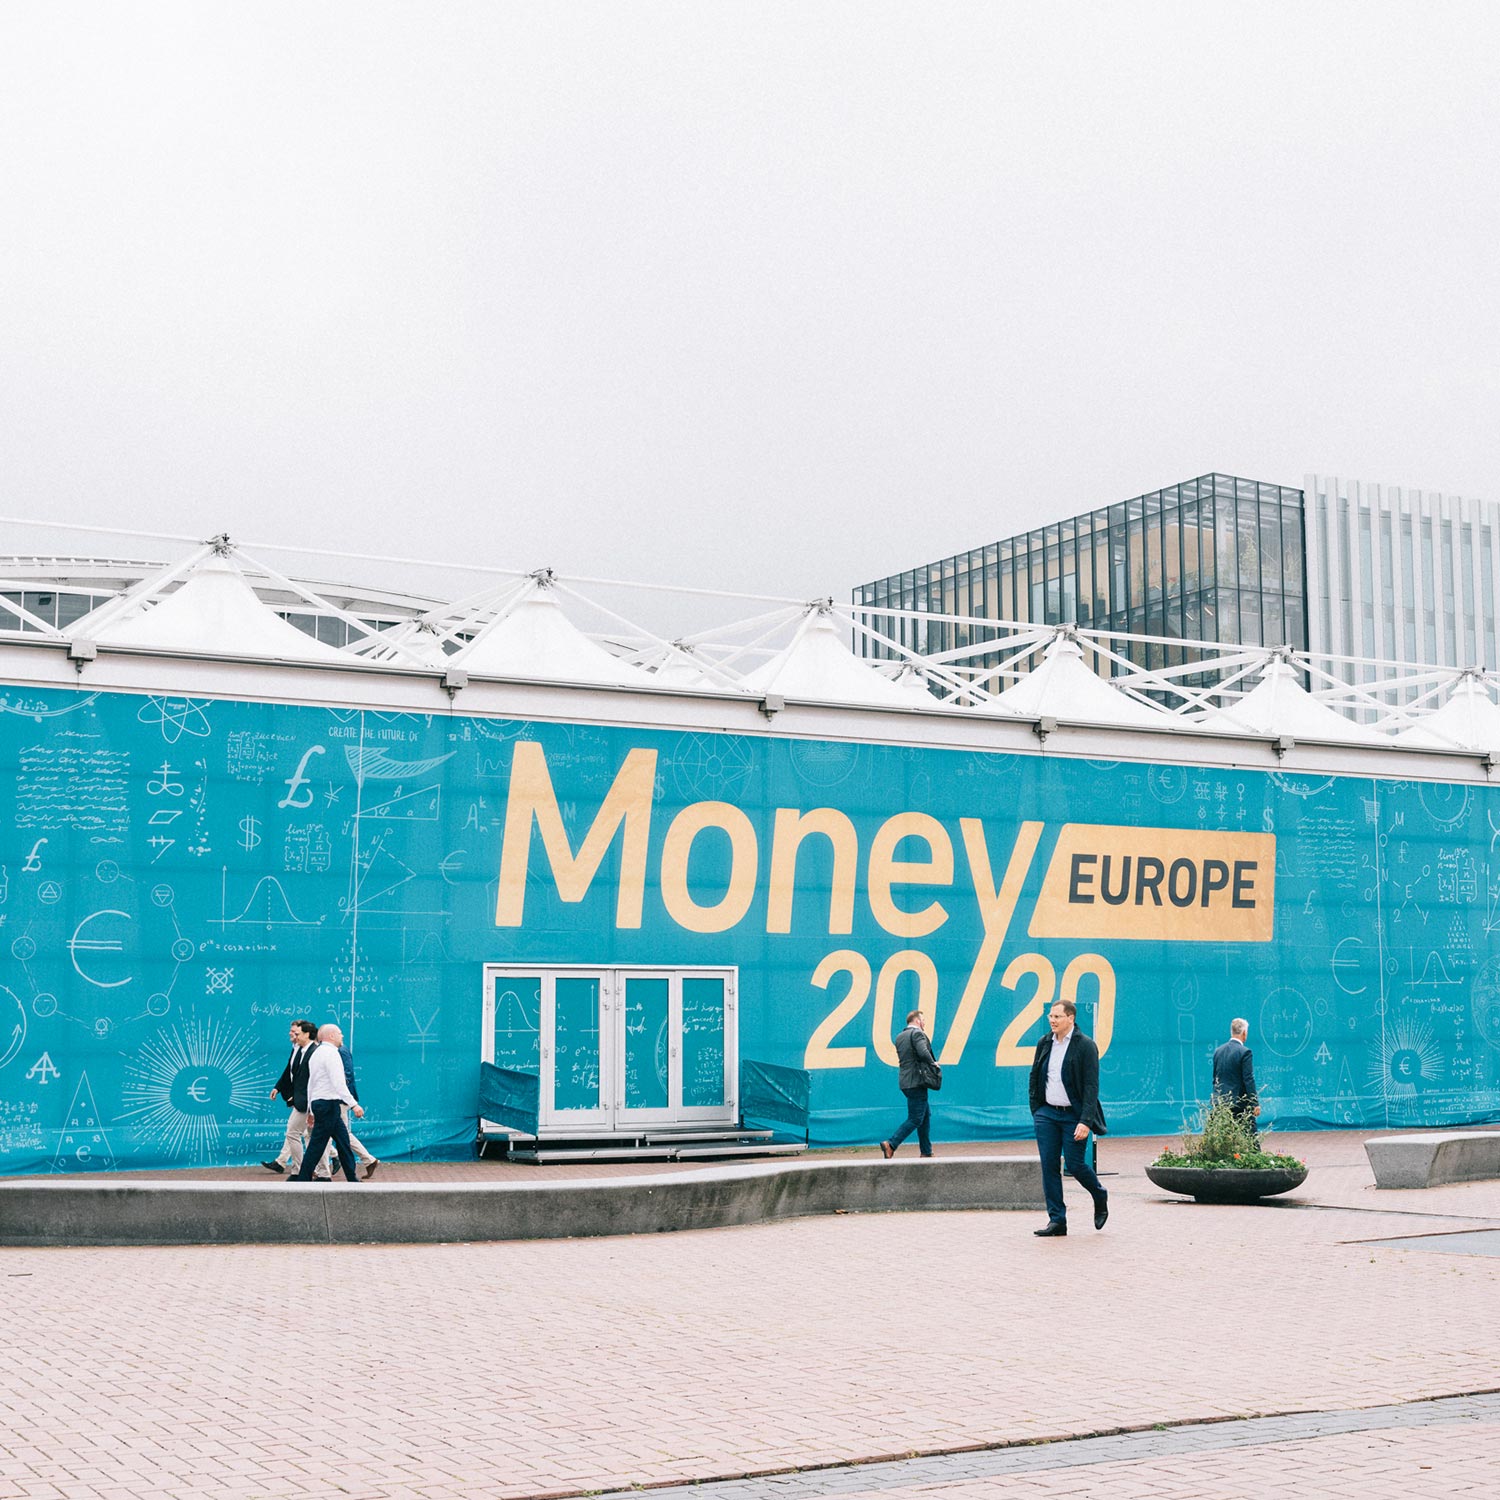 Over three days in early June, the best and brightest decision makers in the industry met at Money20/20 to discuss the biggest transformation in decades.